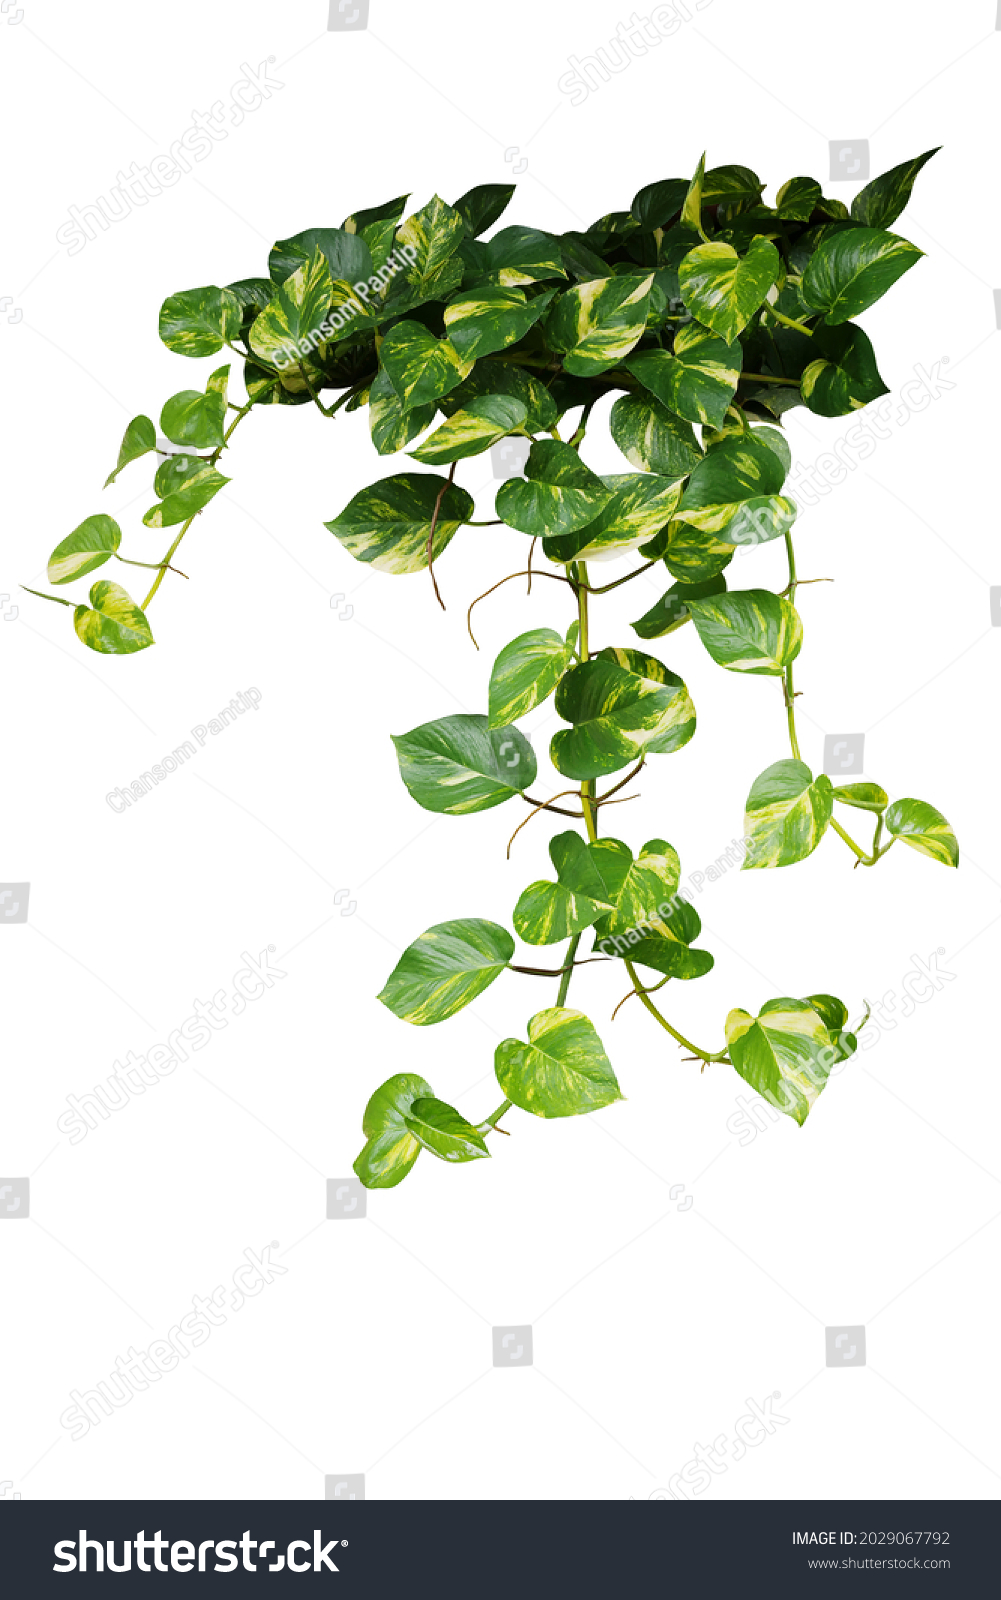 Heart shaped green variegated leave hanging vine plant bush of devil’s ivy or golden pothos (Epipremnum aureum) popular foliage tropical houseplant isolated on white with clipping path. #2029067792